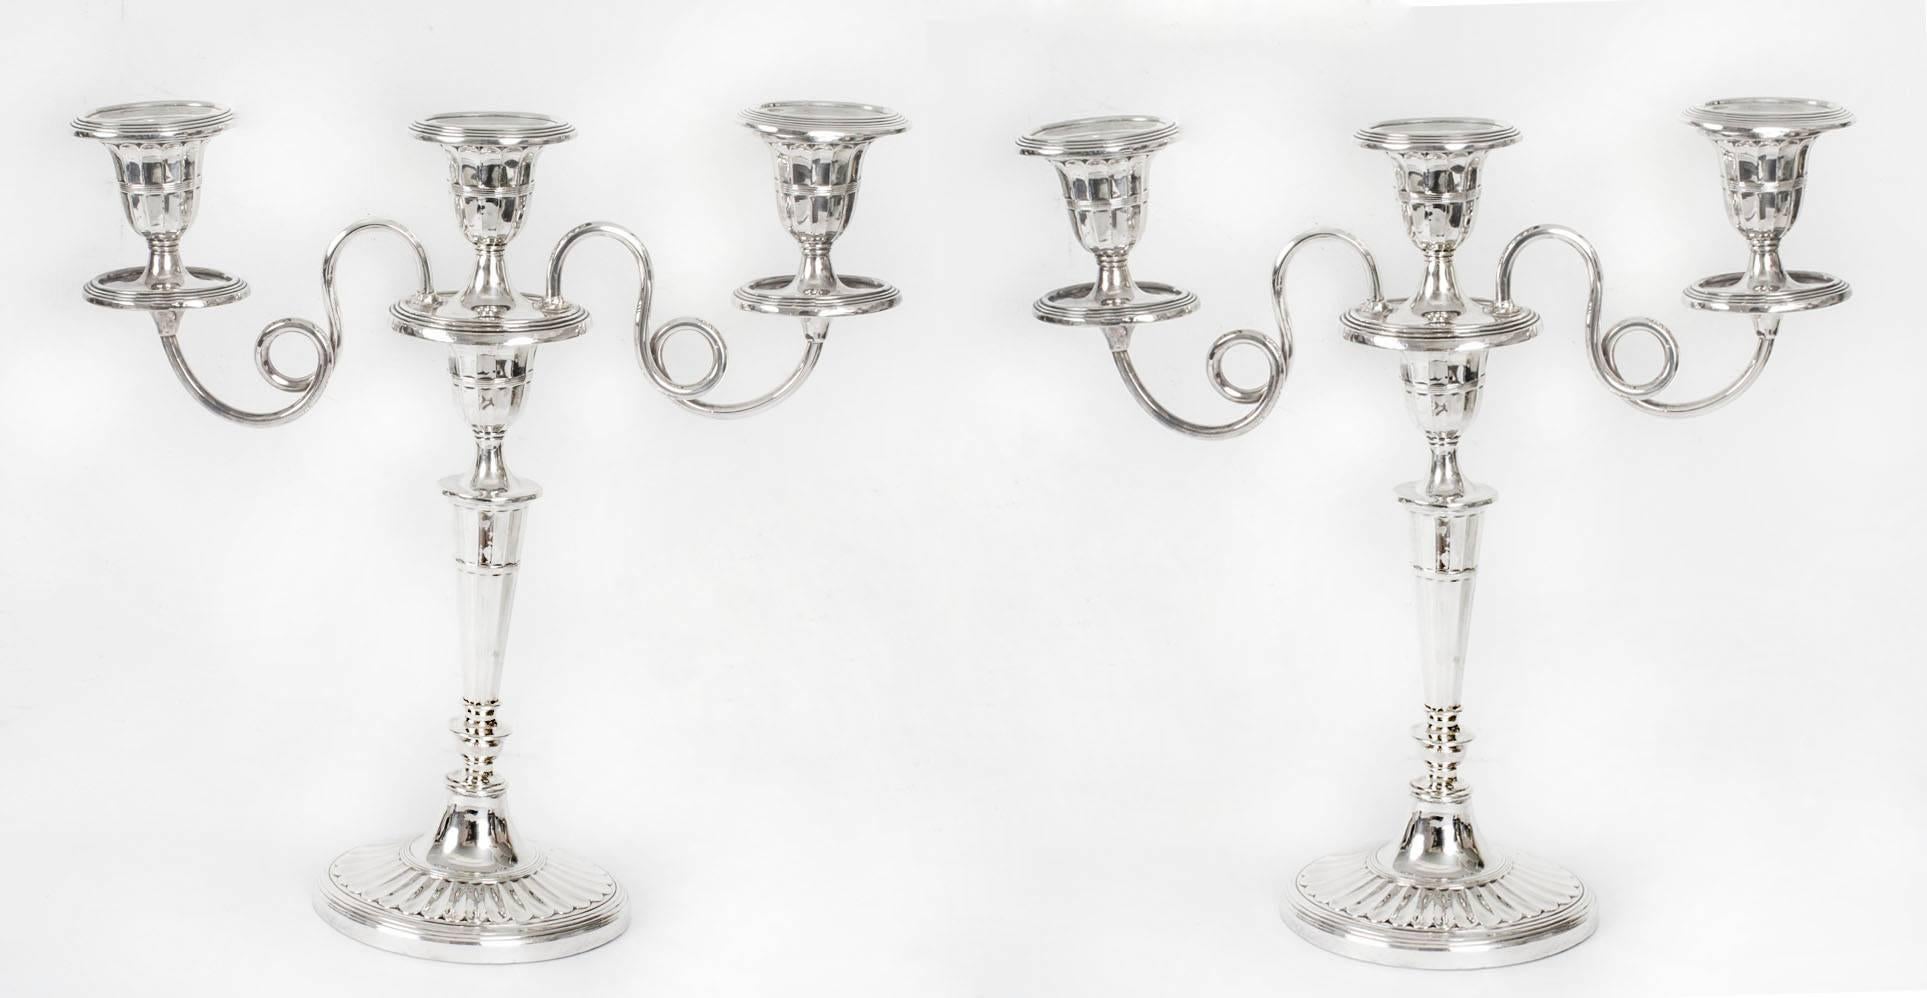 This is an exquisite set of four table lights comprising a pair of Edwardian English antique sterling silver candlesticks with hallmarks for London, 1902 and the makers mark of the renowned silversmith Wiliam Huttons & Sons, together with a pair of